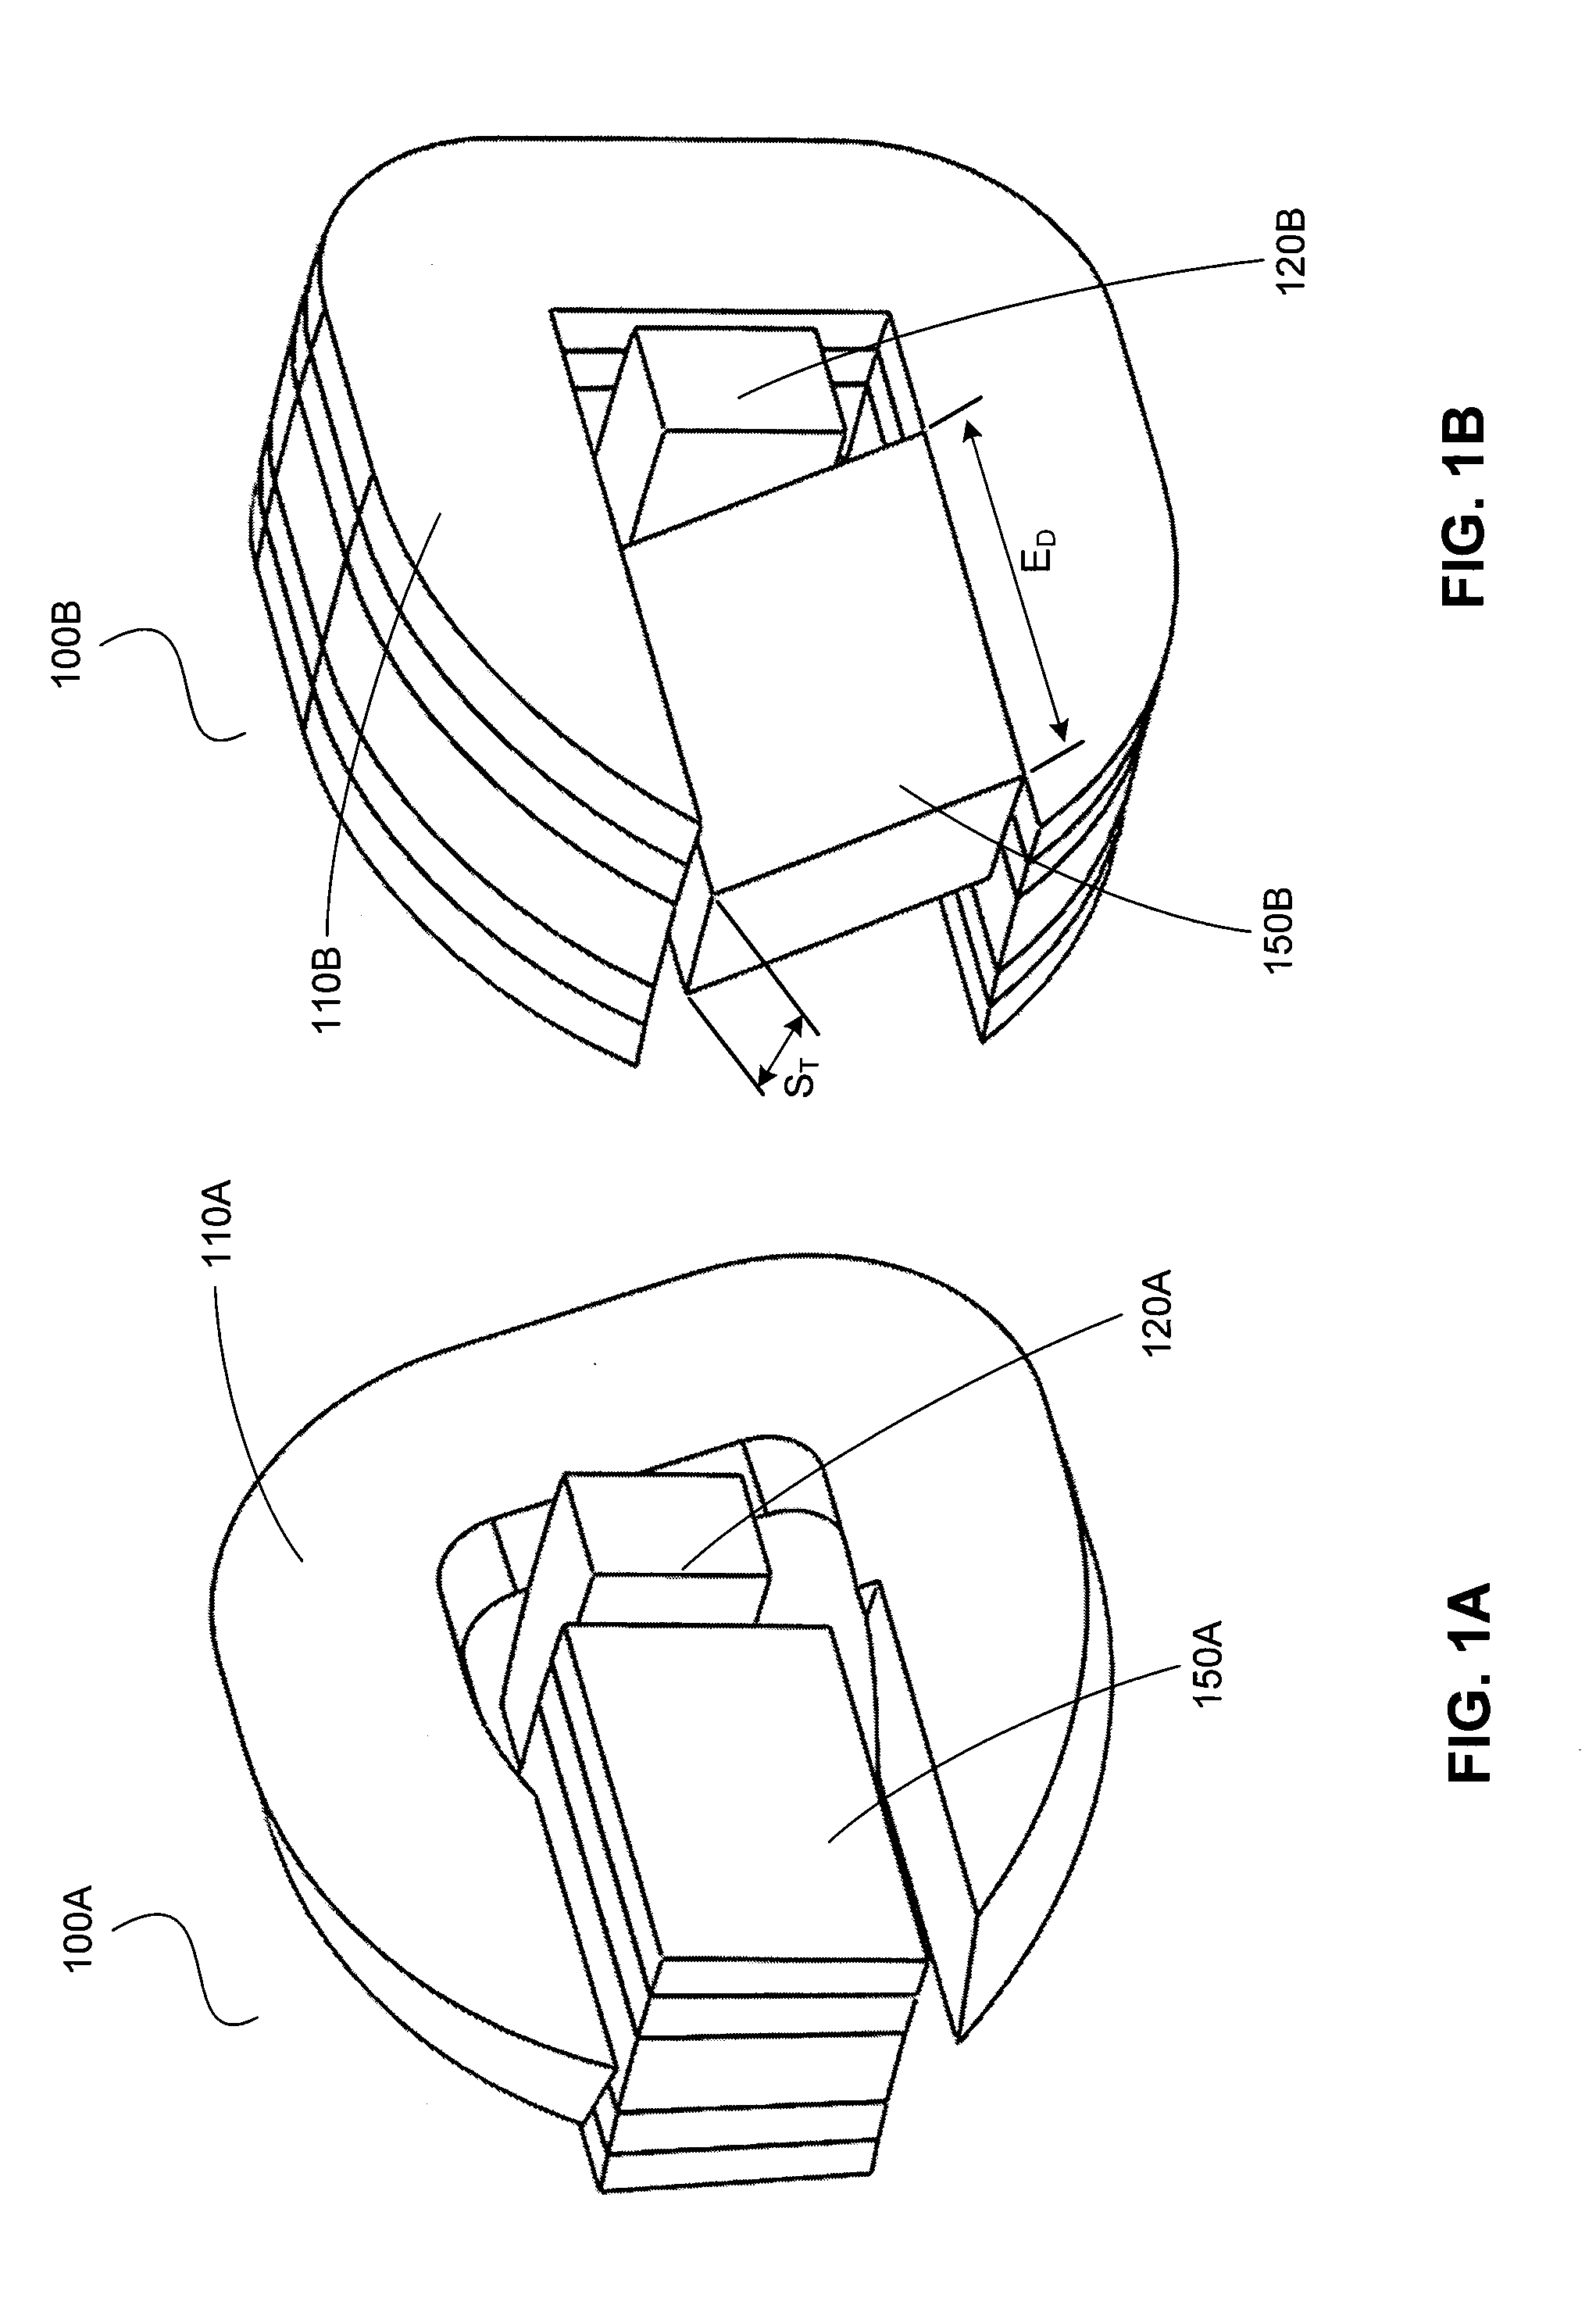 Transverse and/or commutated flux system rotor concepts